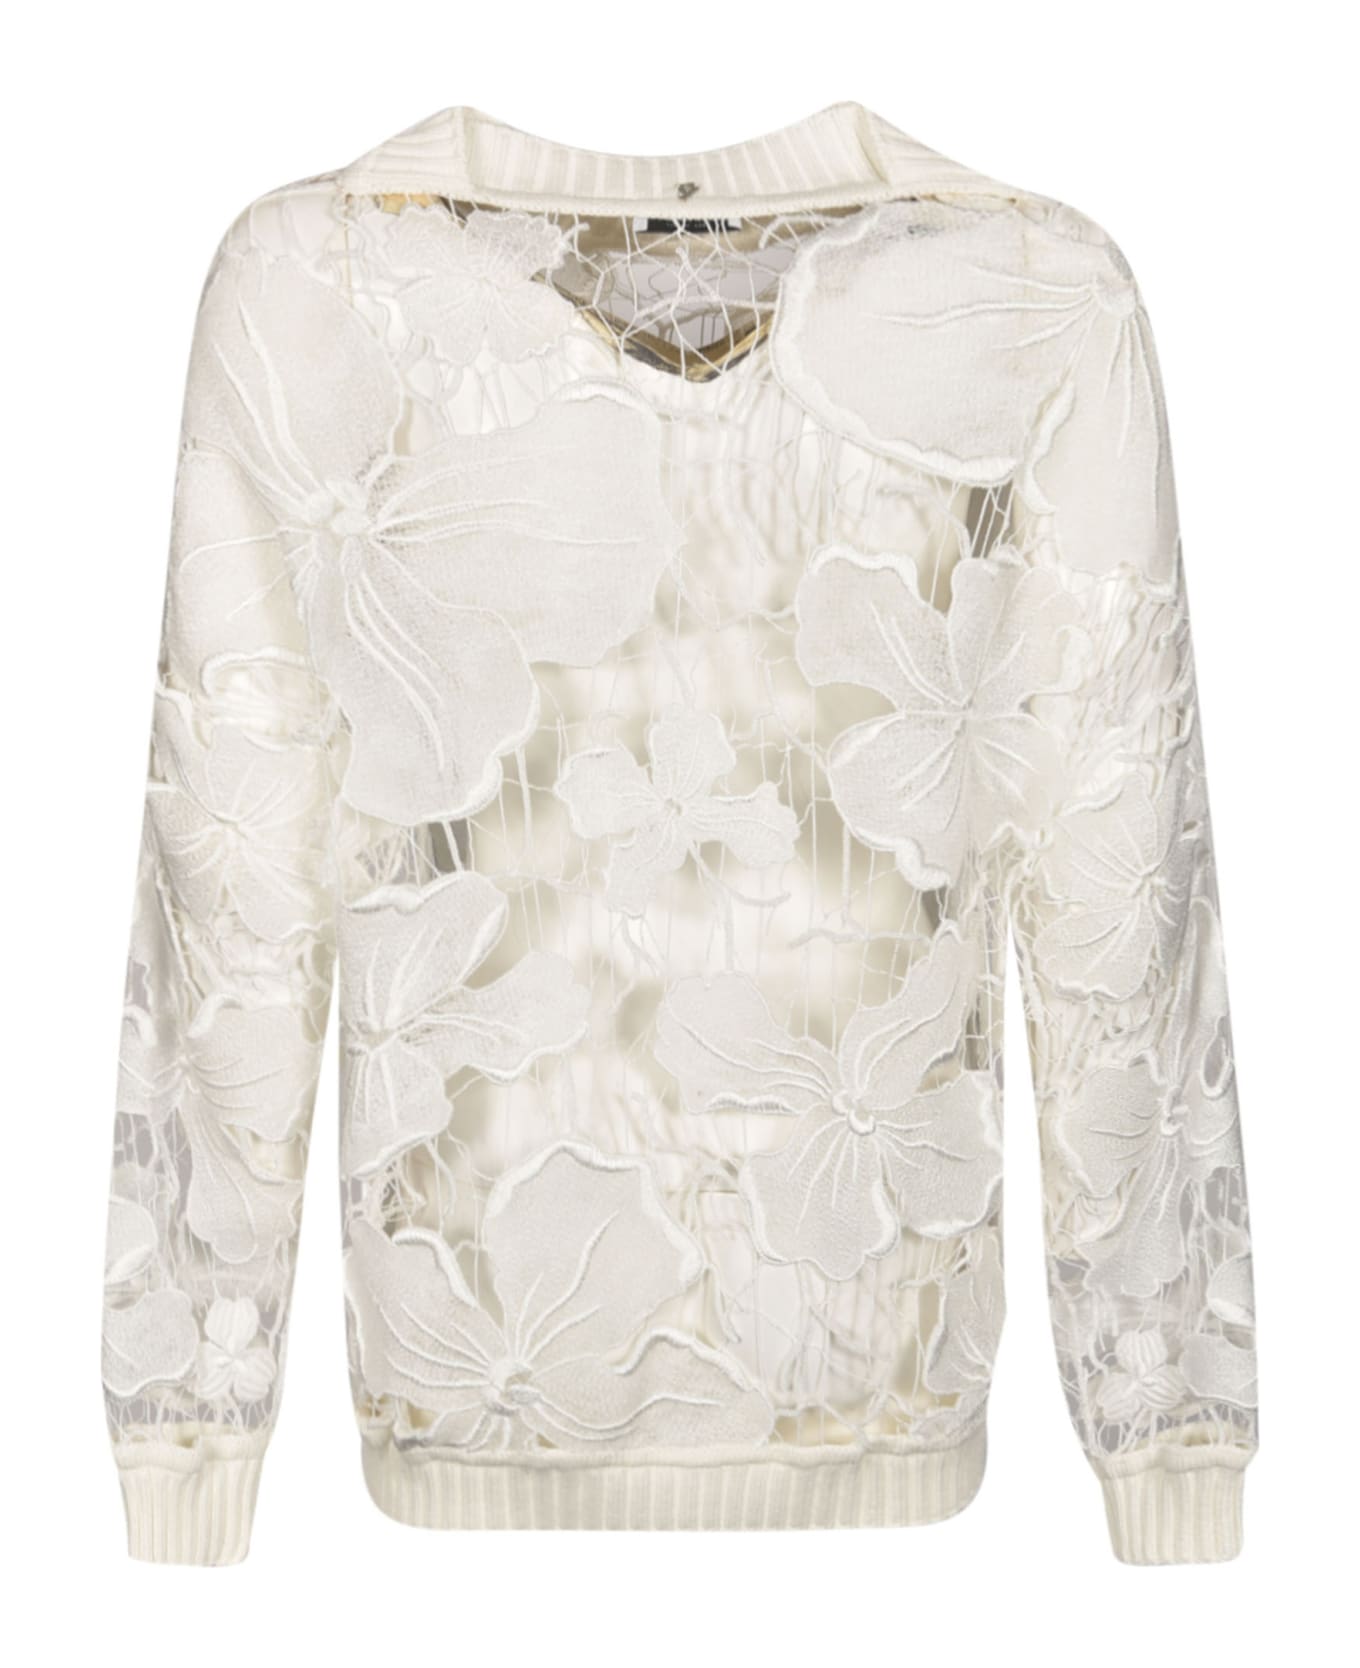 Dondup Floral Sweater - White